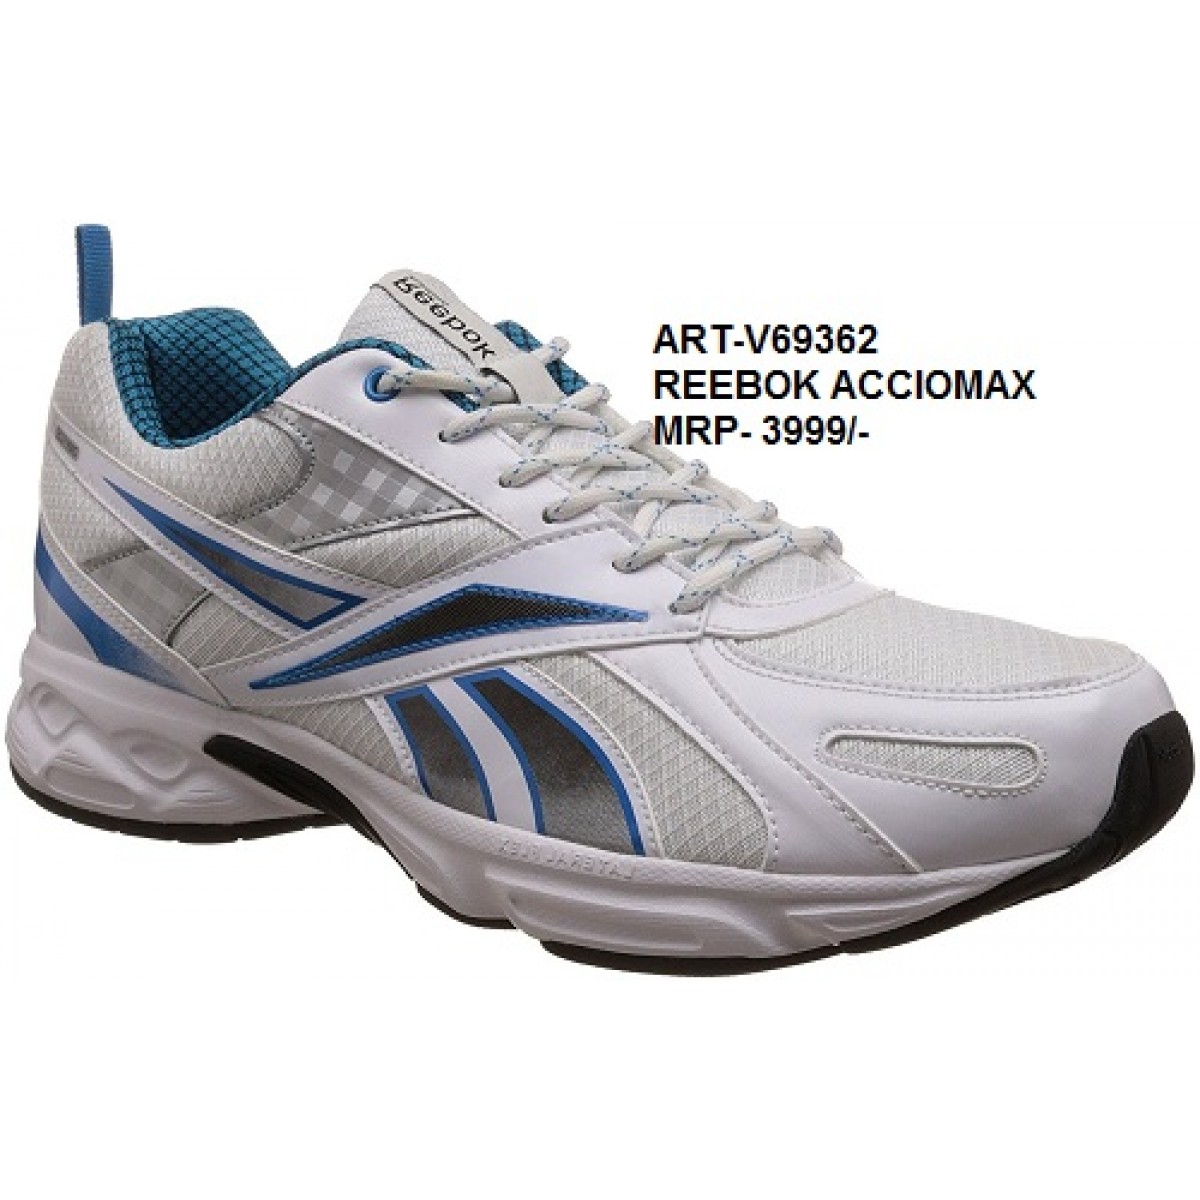 sports shoes mrp